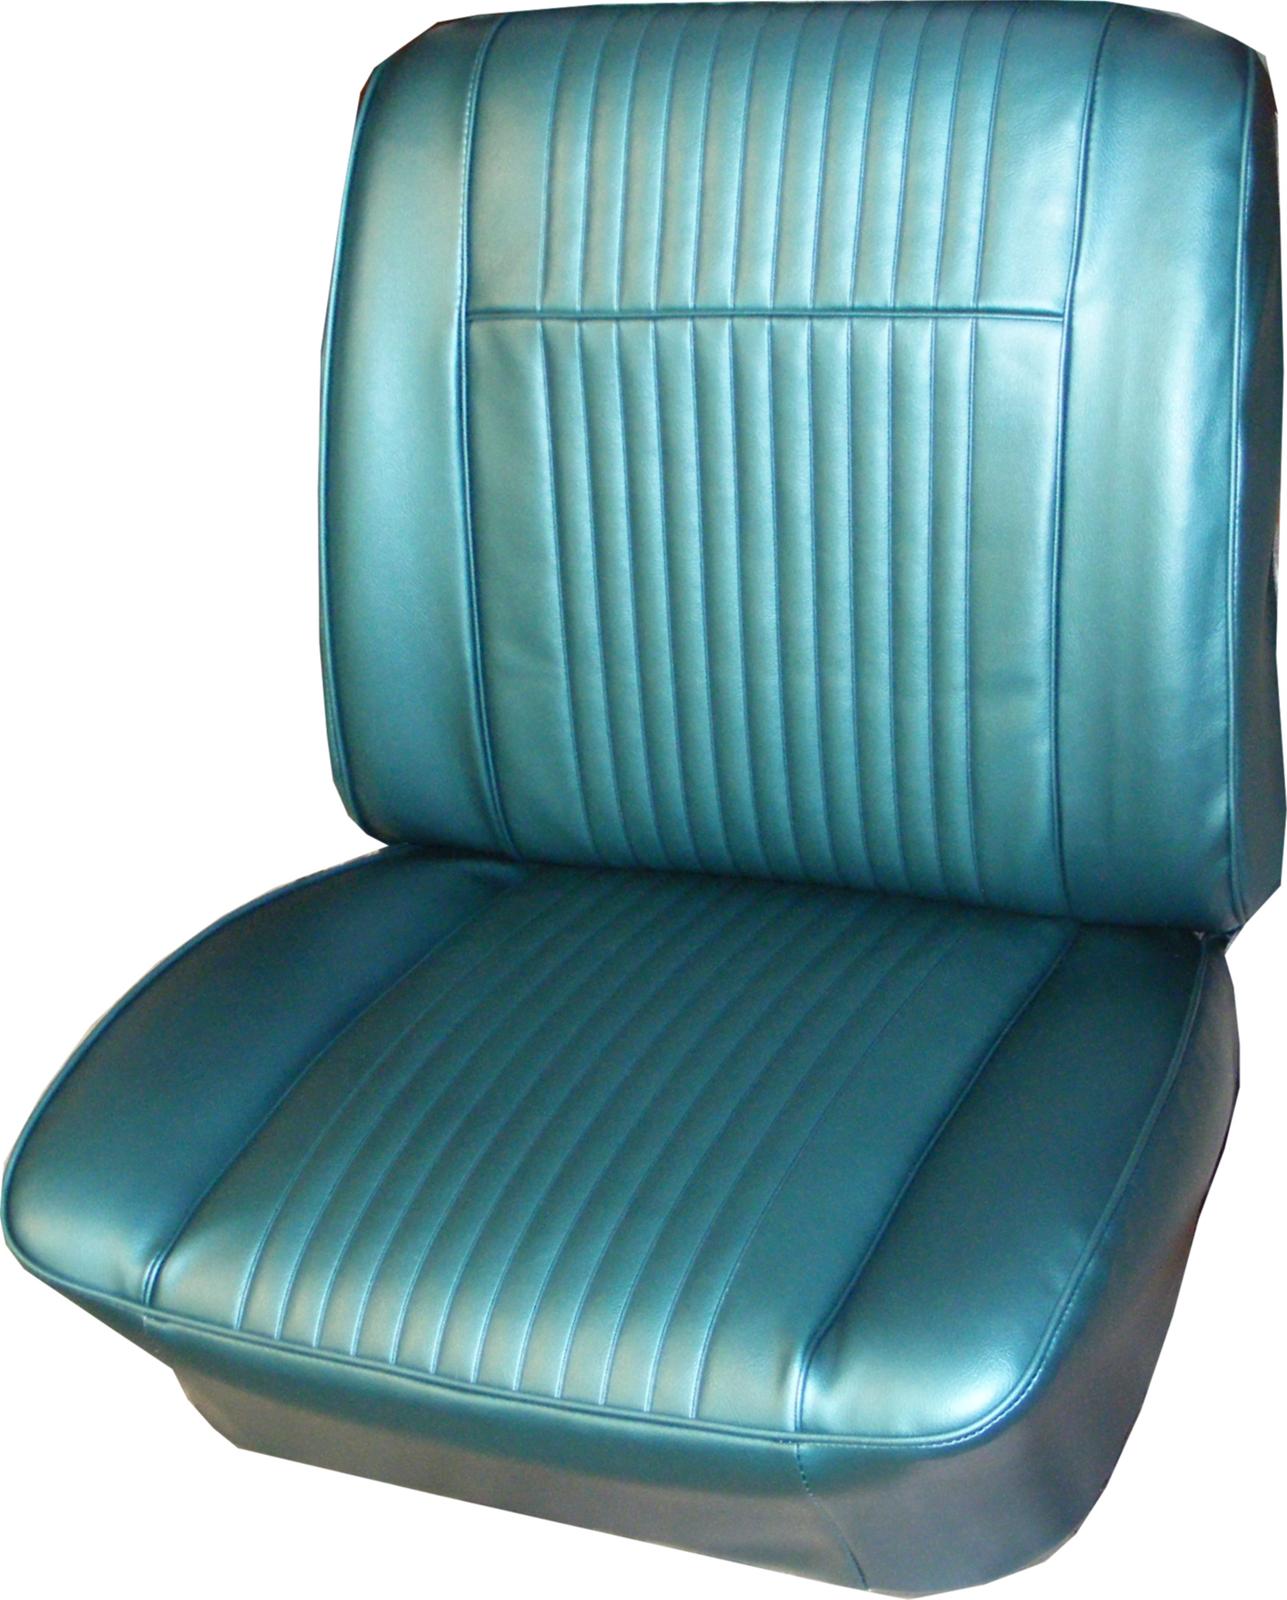 1965 Pontiac Grand Prix Parisienne Custom Sport Front and Rear Seat Upholstery Covers